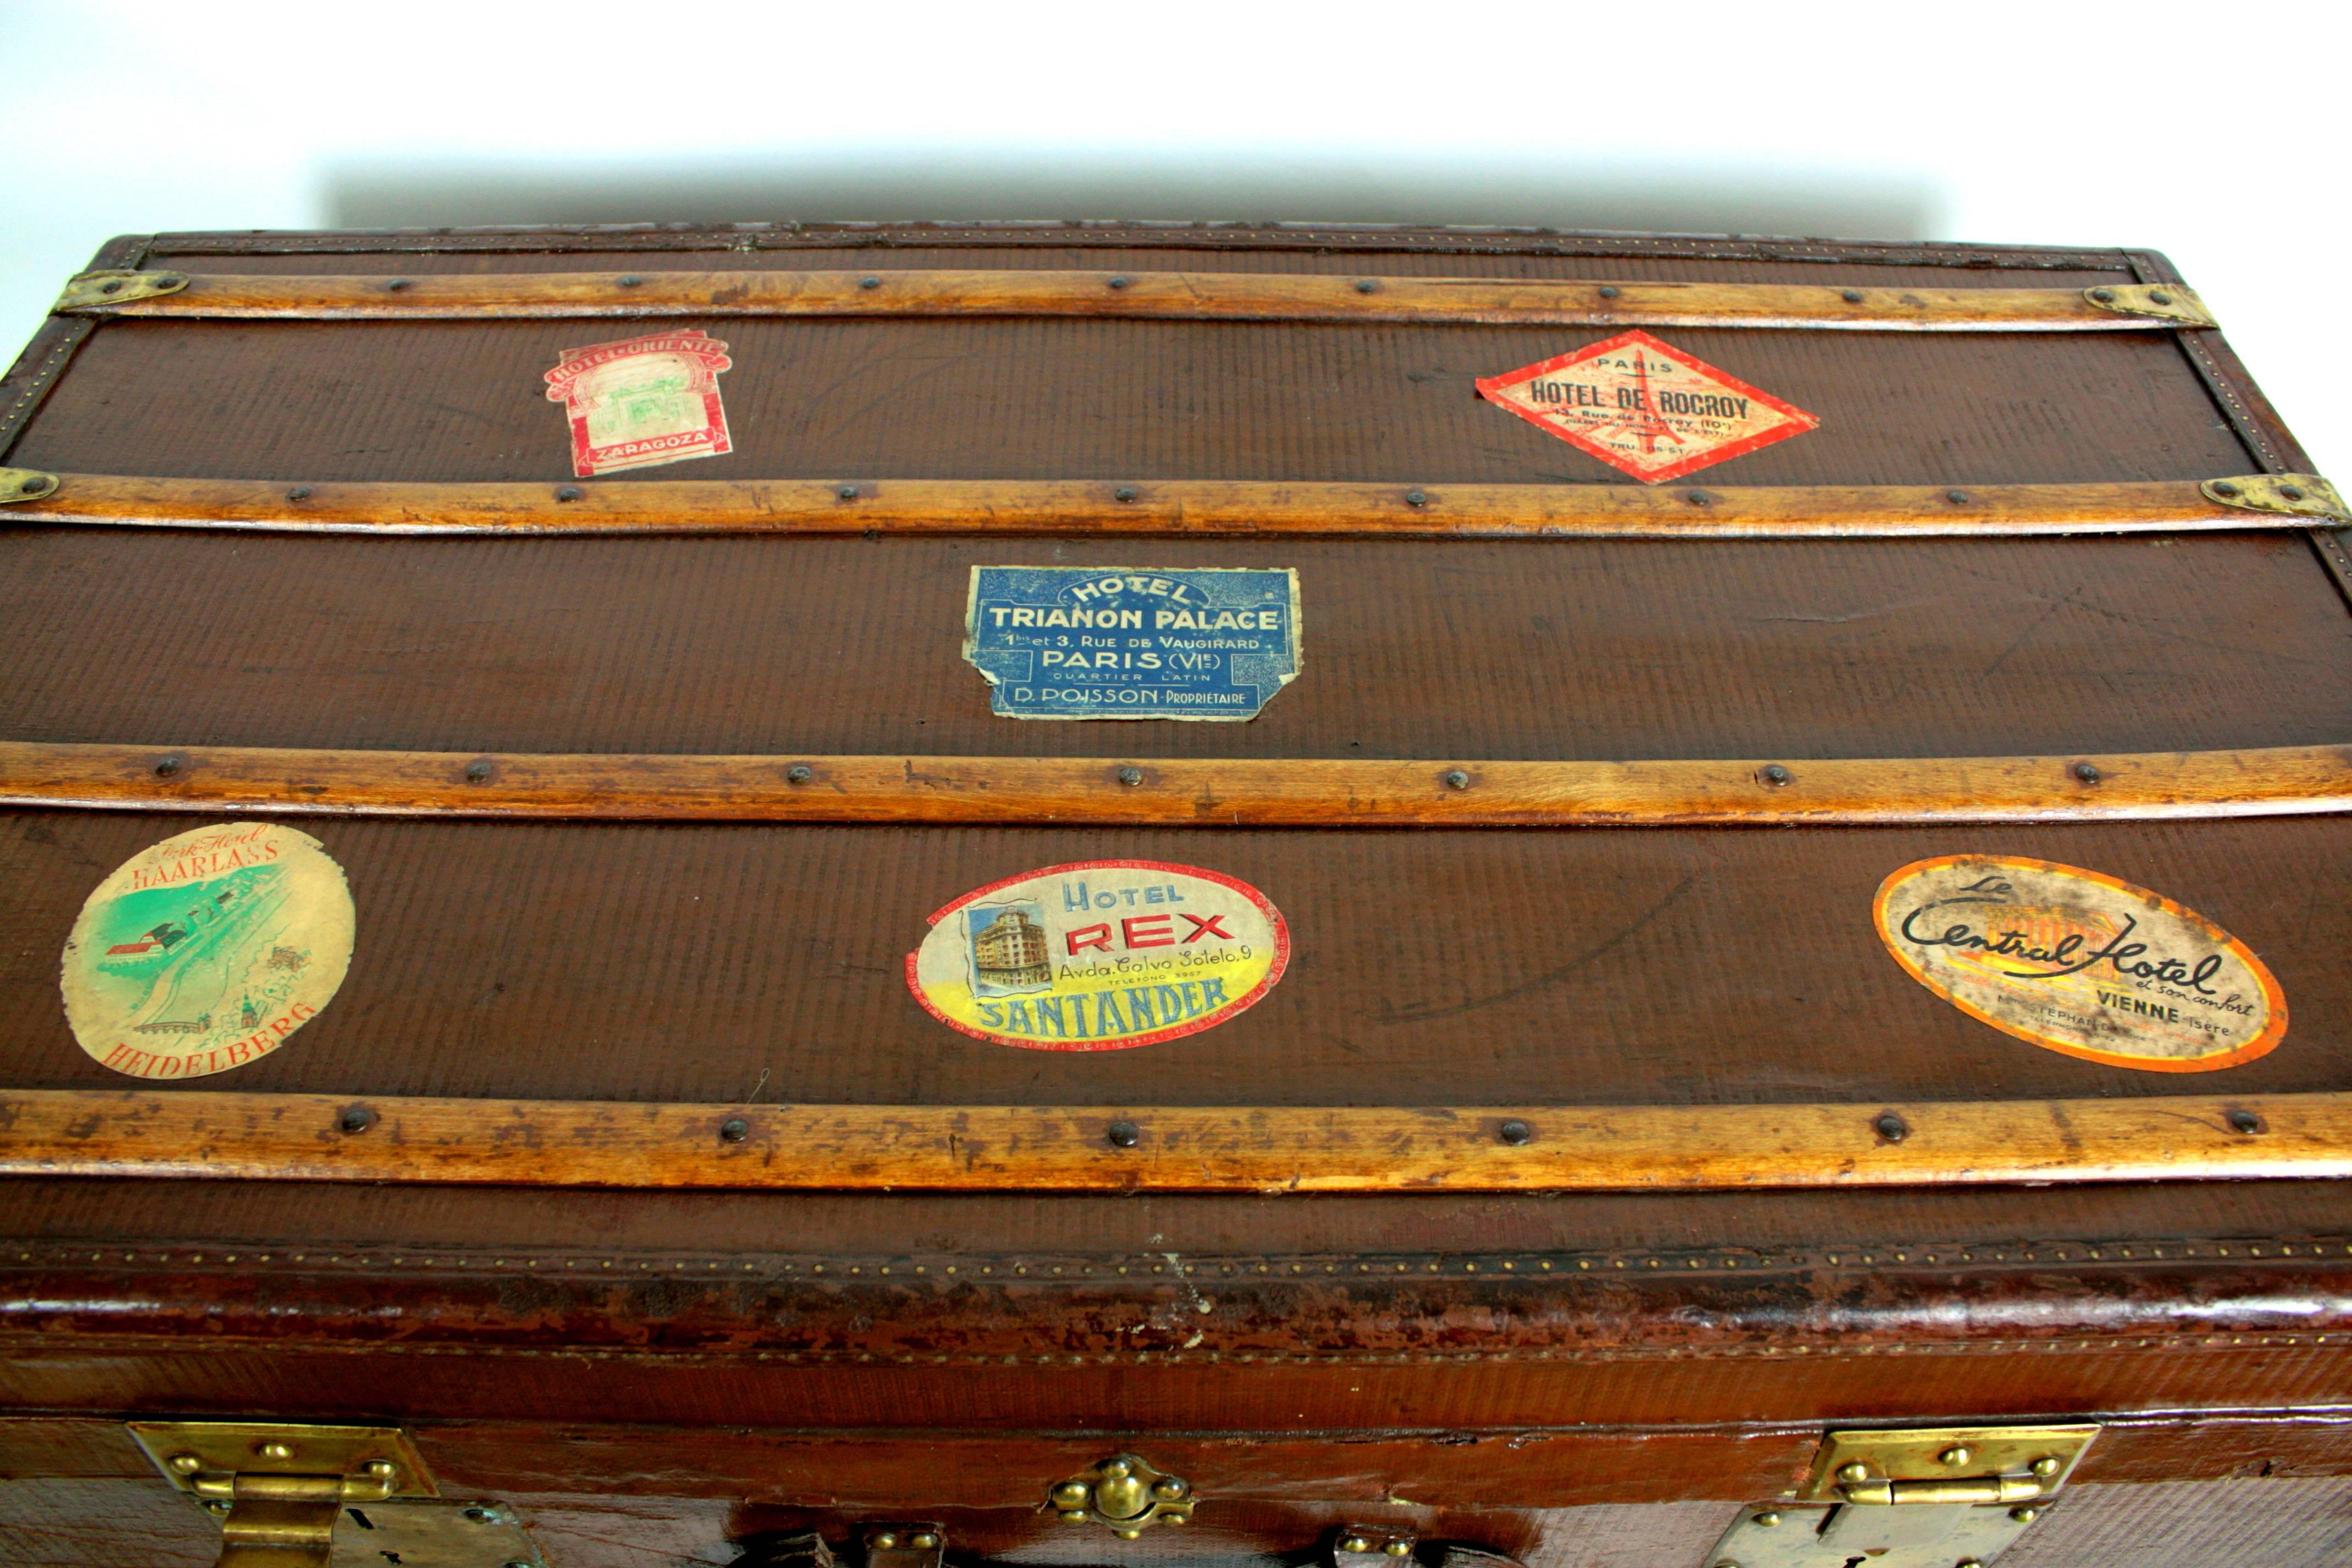 Beautiful steamer trunk made in France at the end of the 19 th c. Decorated with Hotel labels.
Finelly hand crafted with leather handles and corner details. 
Useful as coffee/ side table. Wheels are contemporary.

Avaliable other pieces of antique